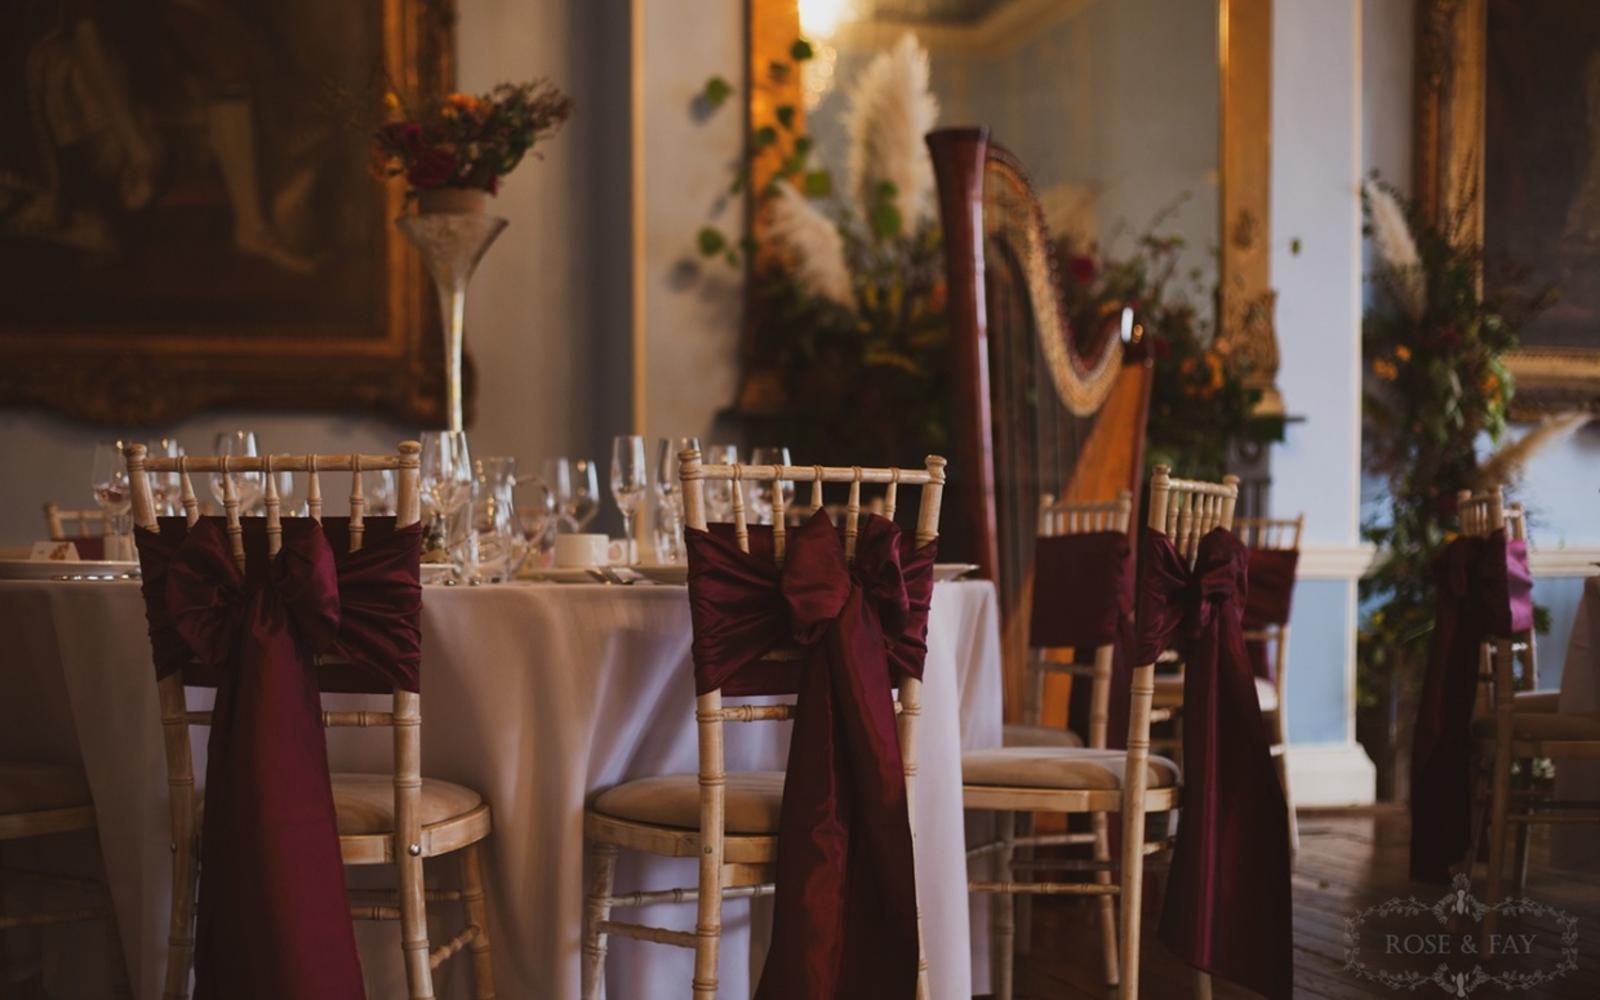 Styled Shot Avante Garde wedding venue Devizes Town Hall Whitewed Willoughby & Wolf Hibiscus & Hodge Pastel Designs classical whimsical autumnal rich burgundy